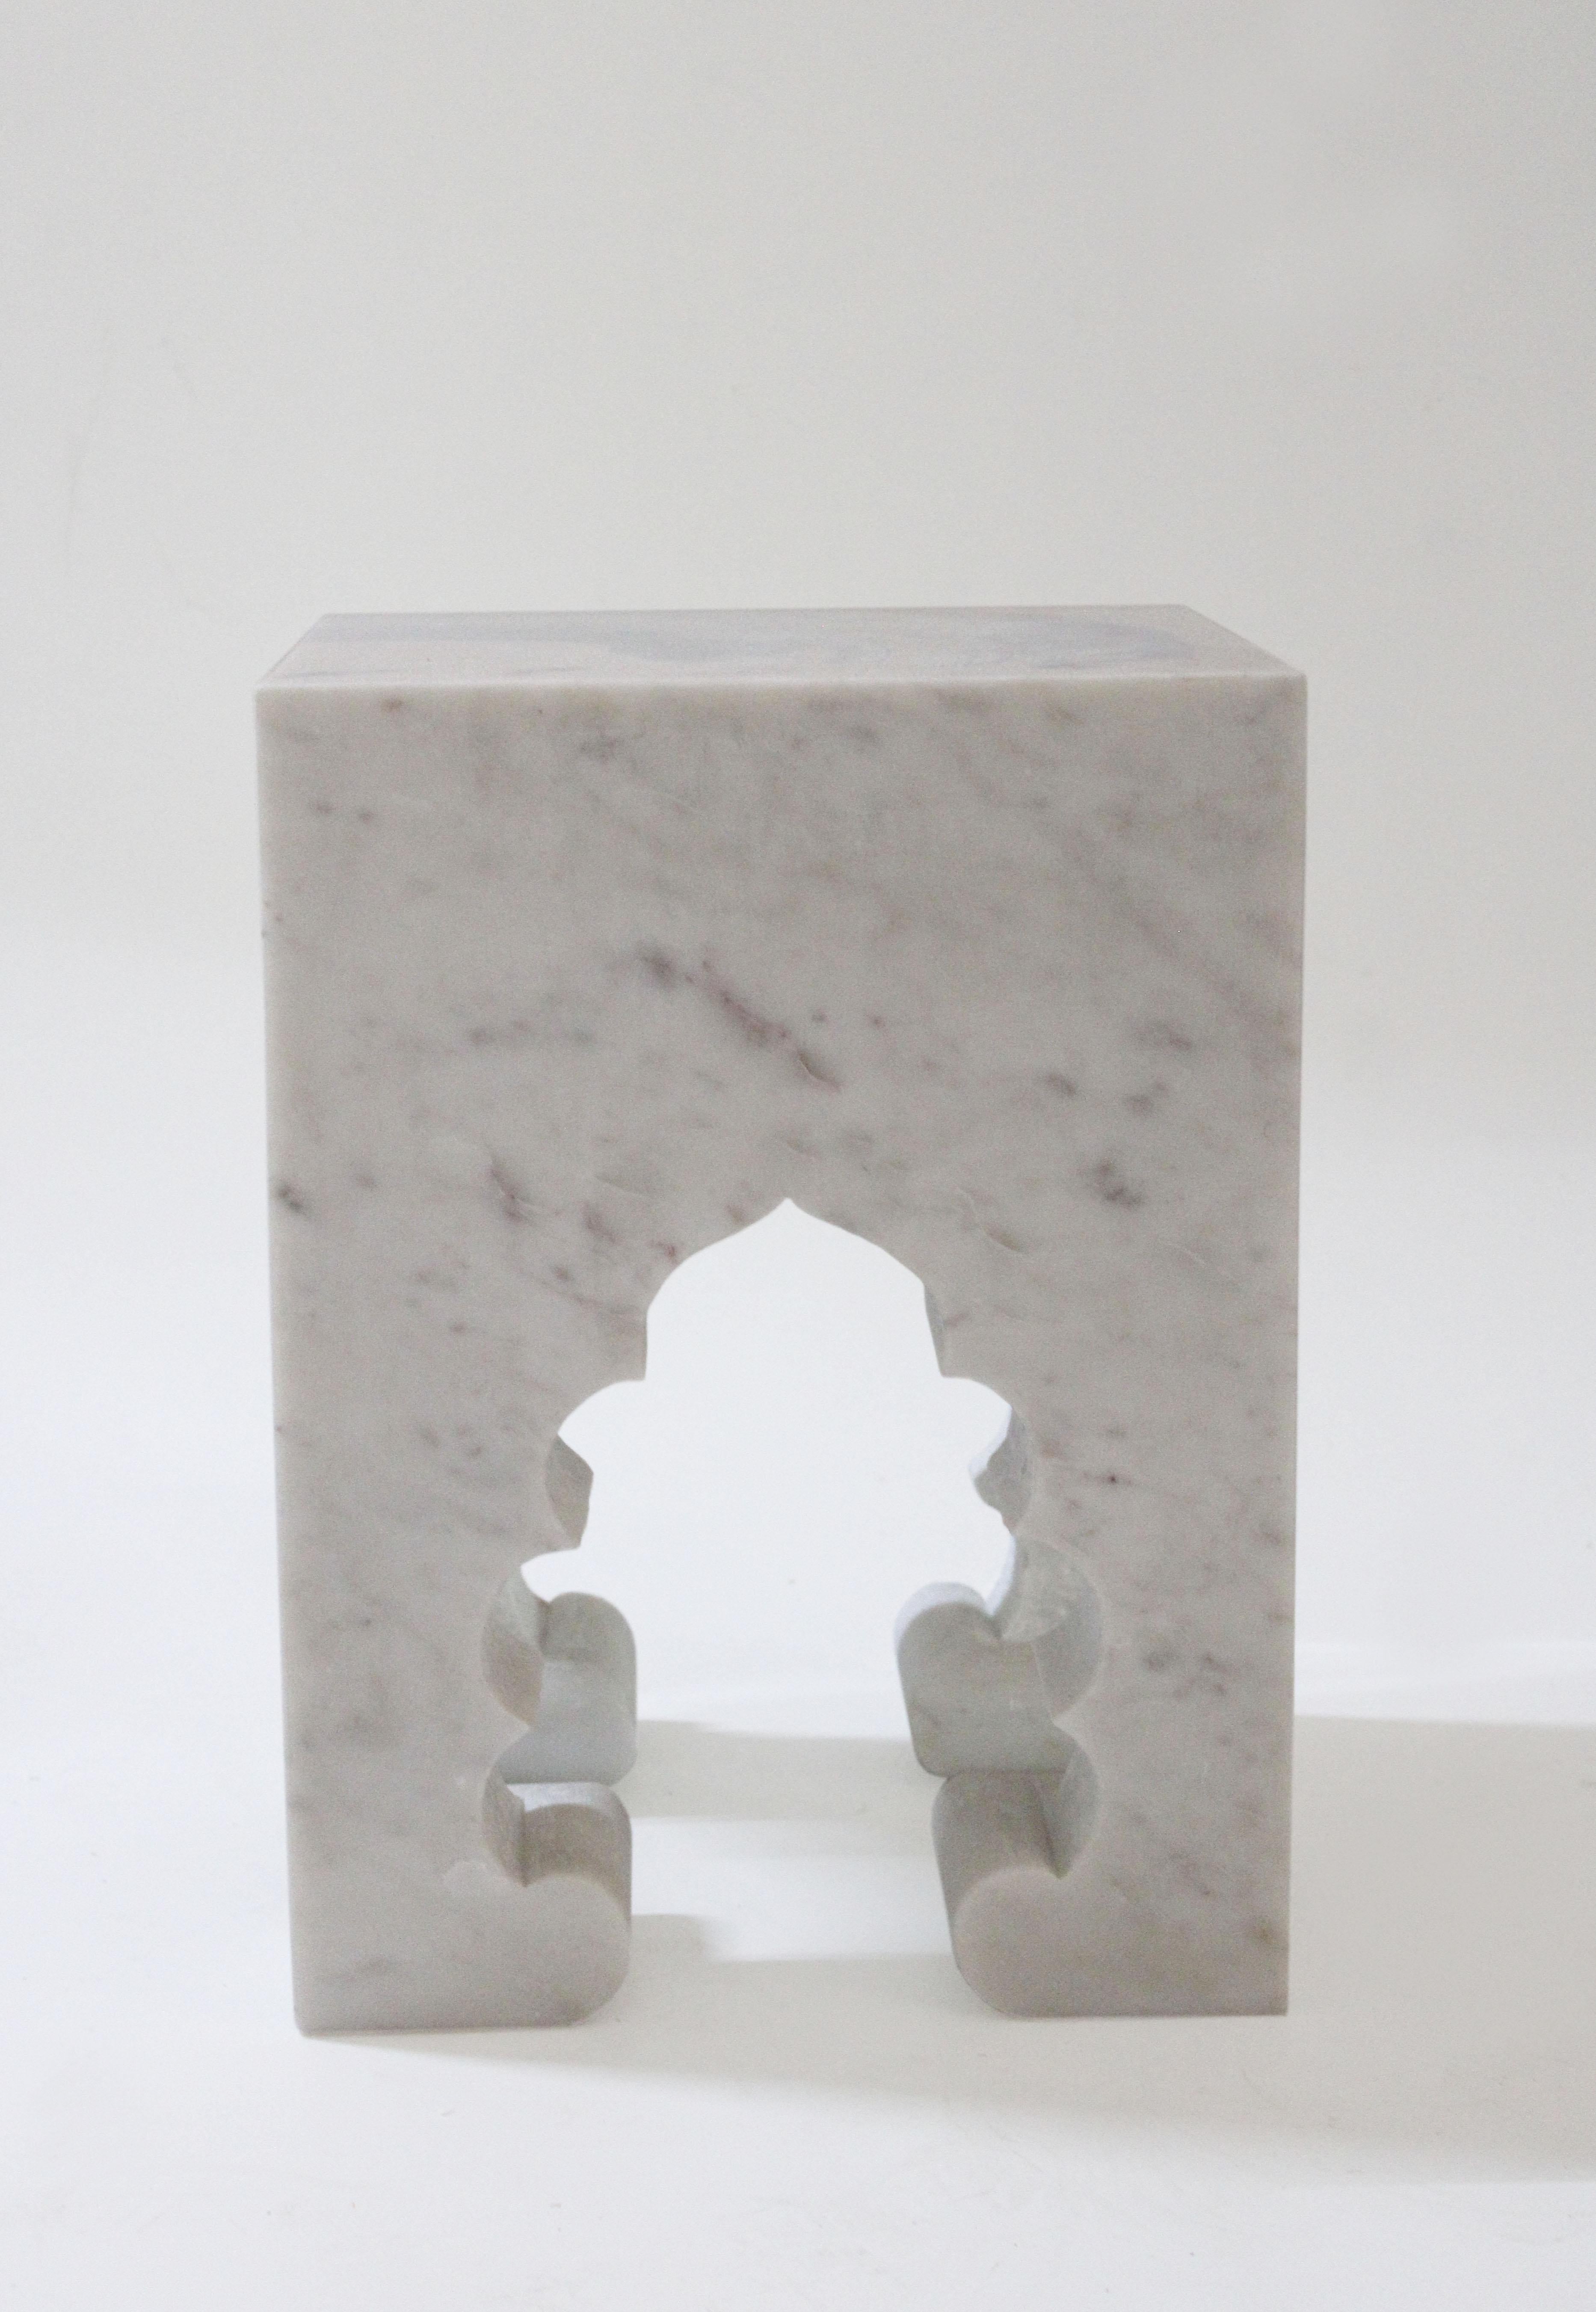 Inspired by the elegant architectural element, namely the mehrabs, he saw in the palaces of Mughal India, the renowned designer Paul Mathieu has created this unique hand-carved side table. Solid blocks of marble are hand-carved into low elegant